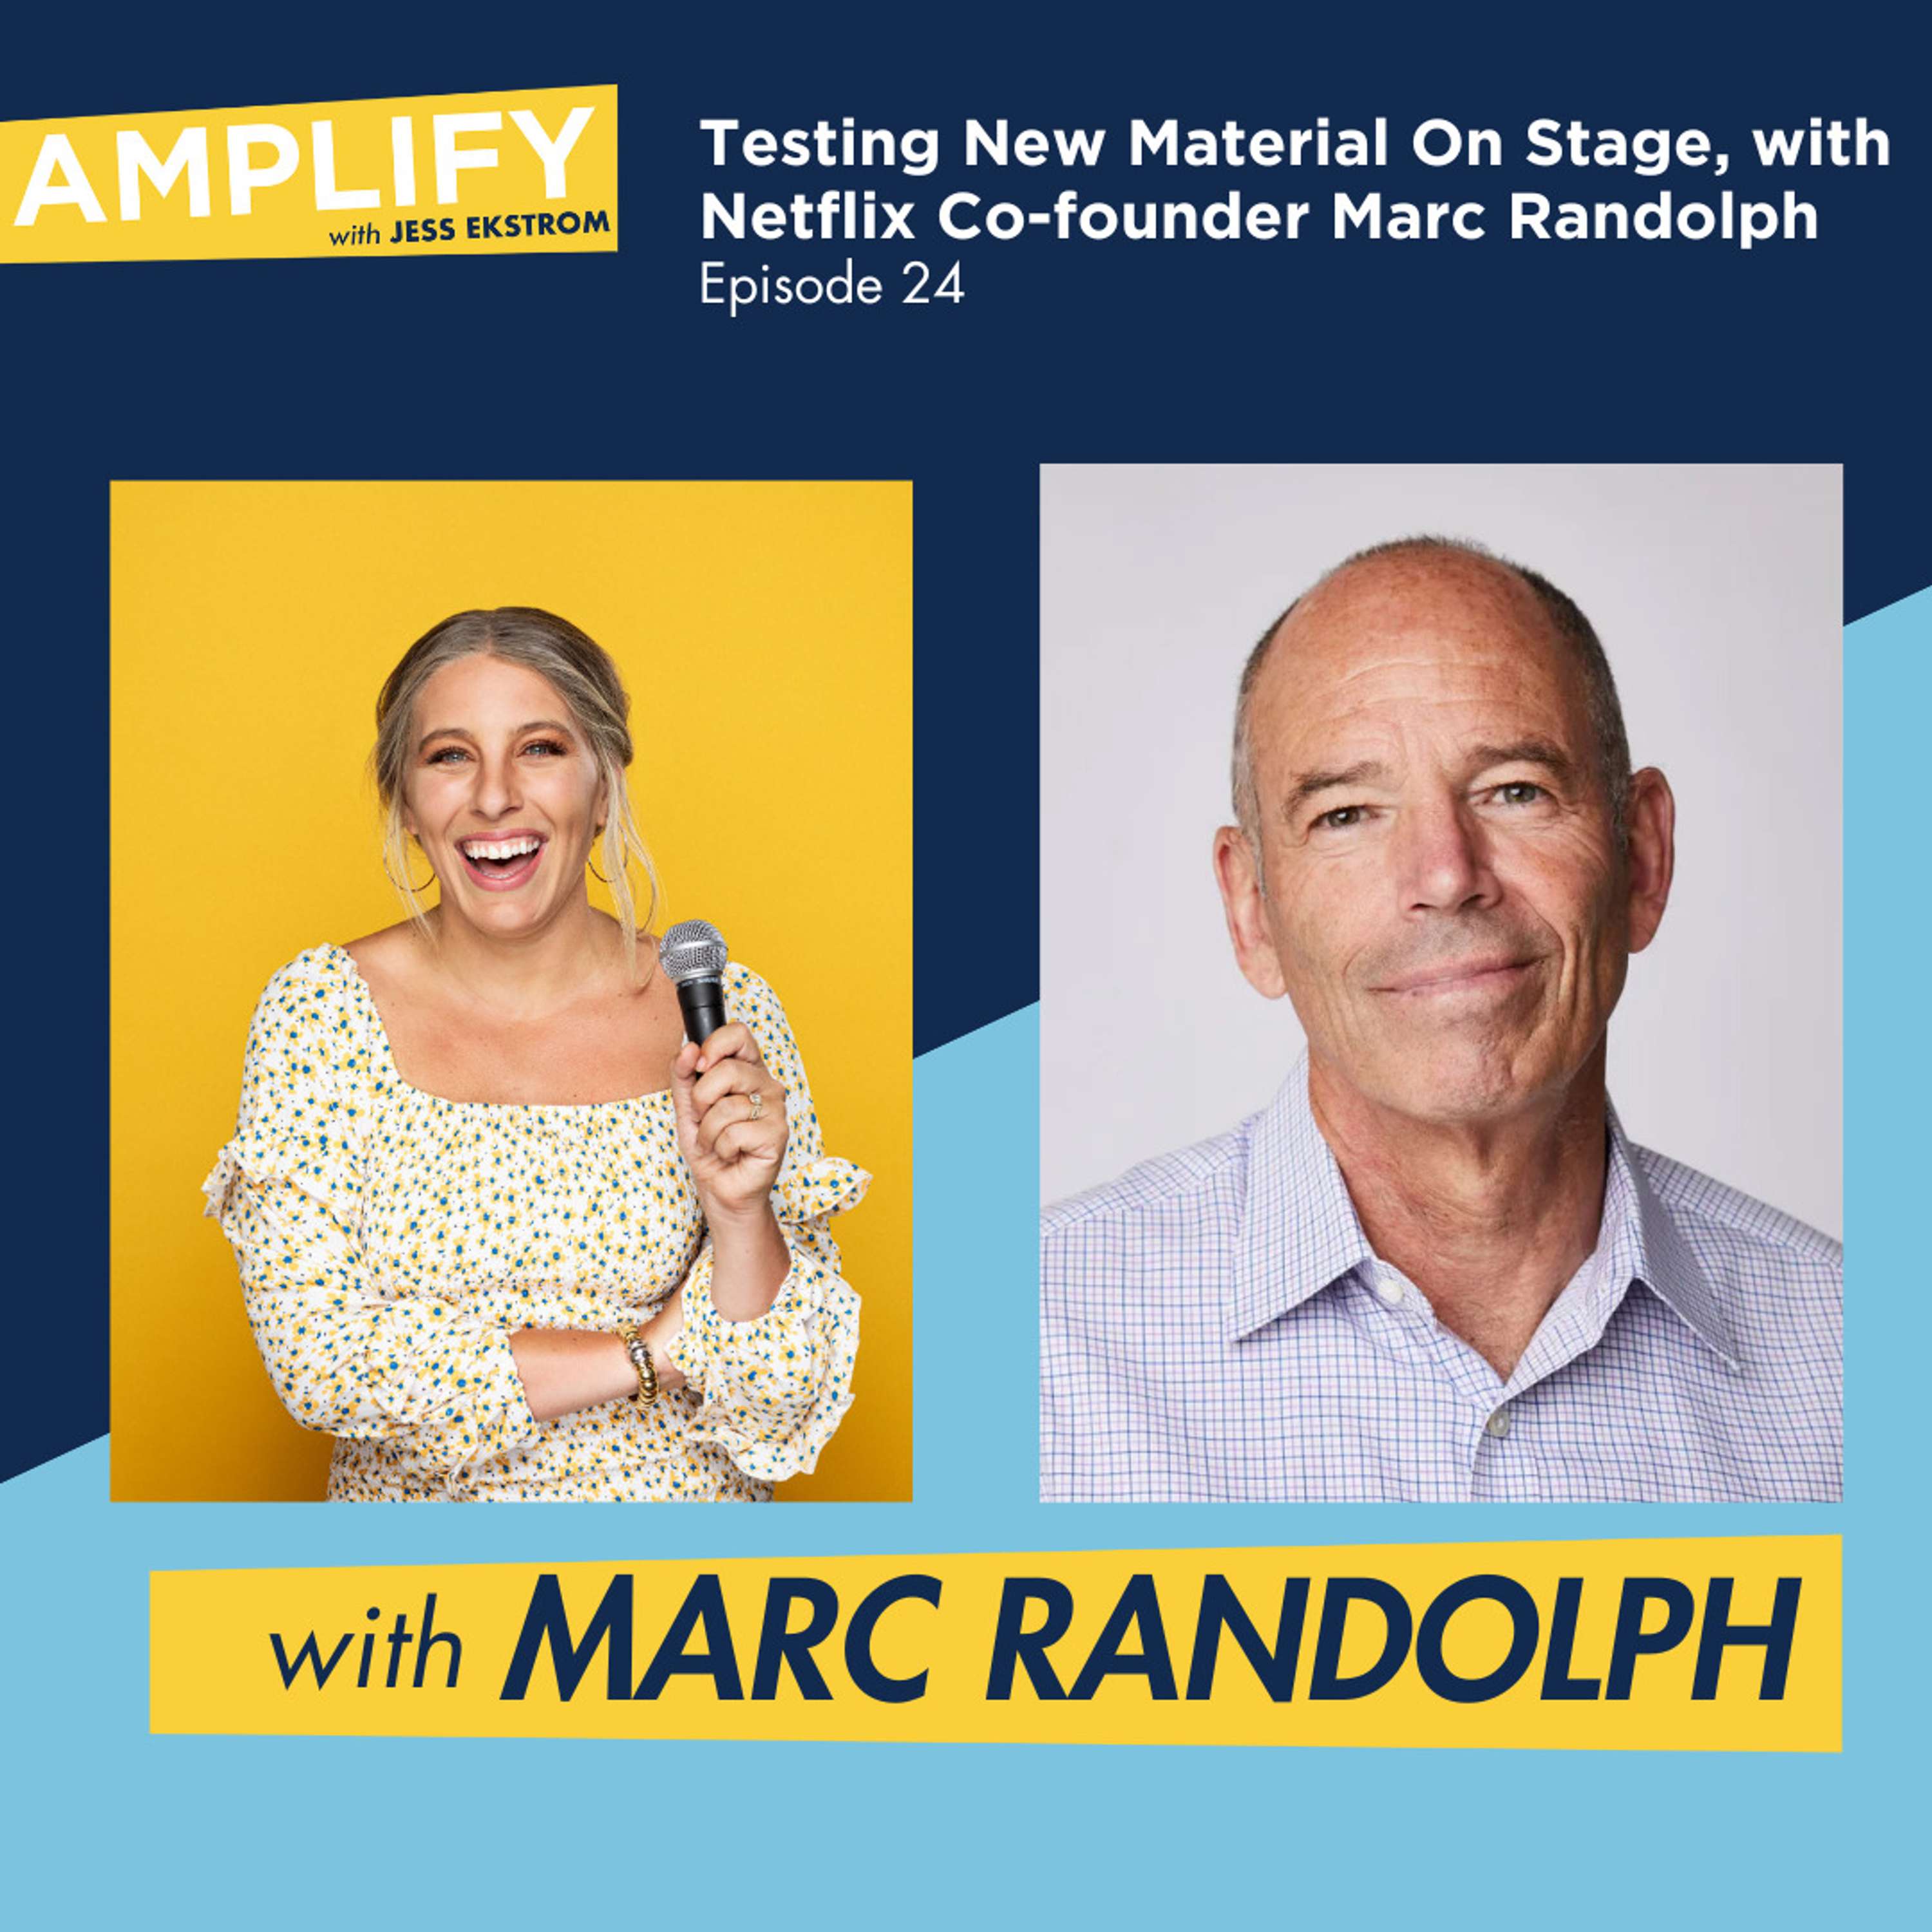 24. Netflix Co-founder Marc Randolph on Testing New Material On Stage